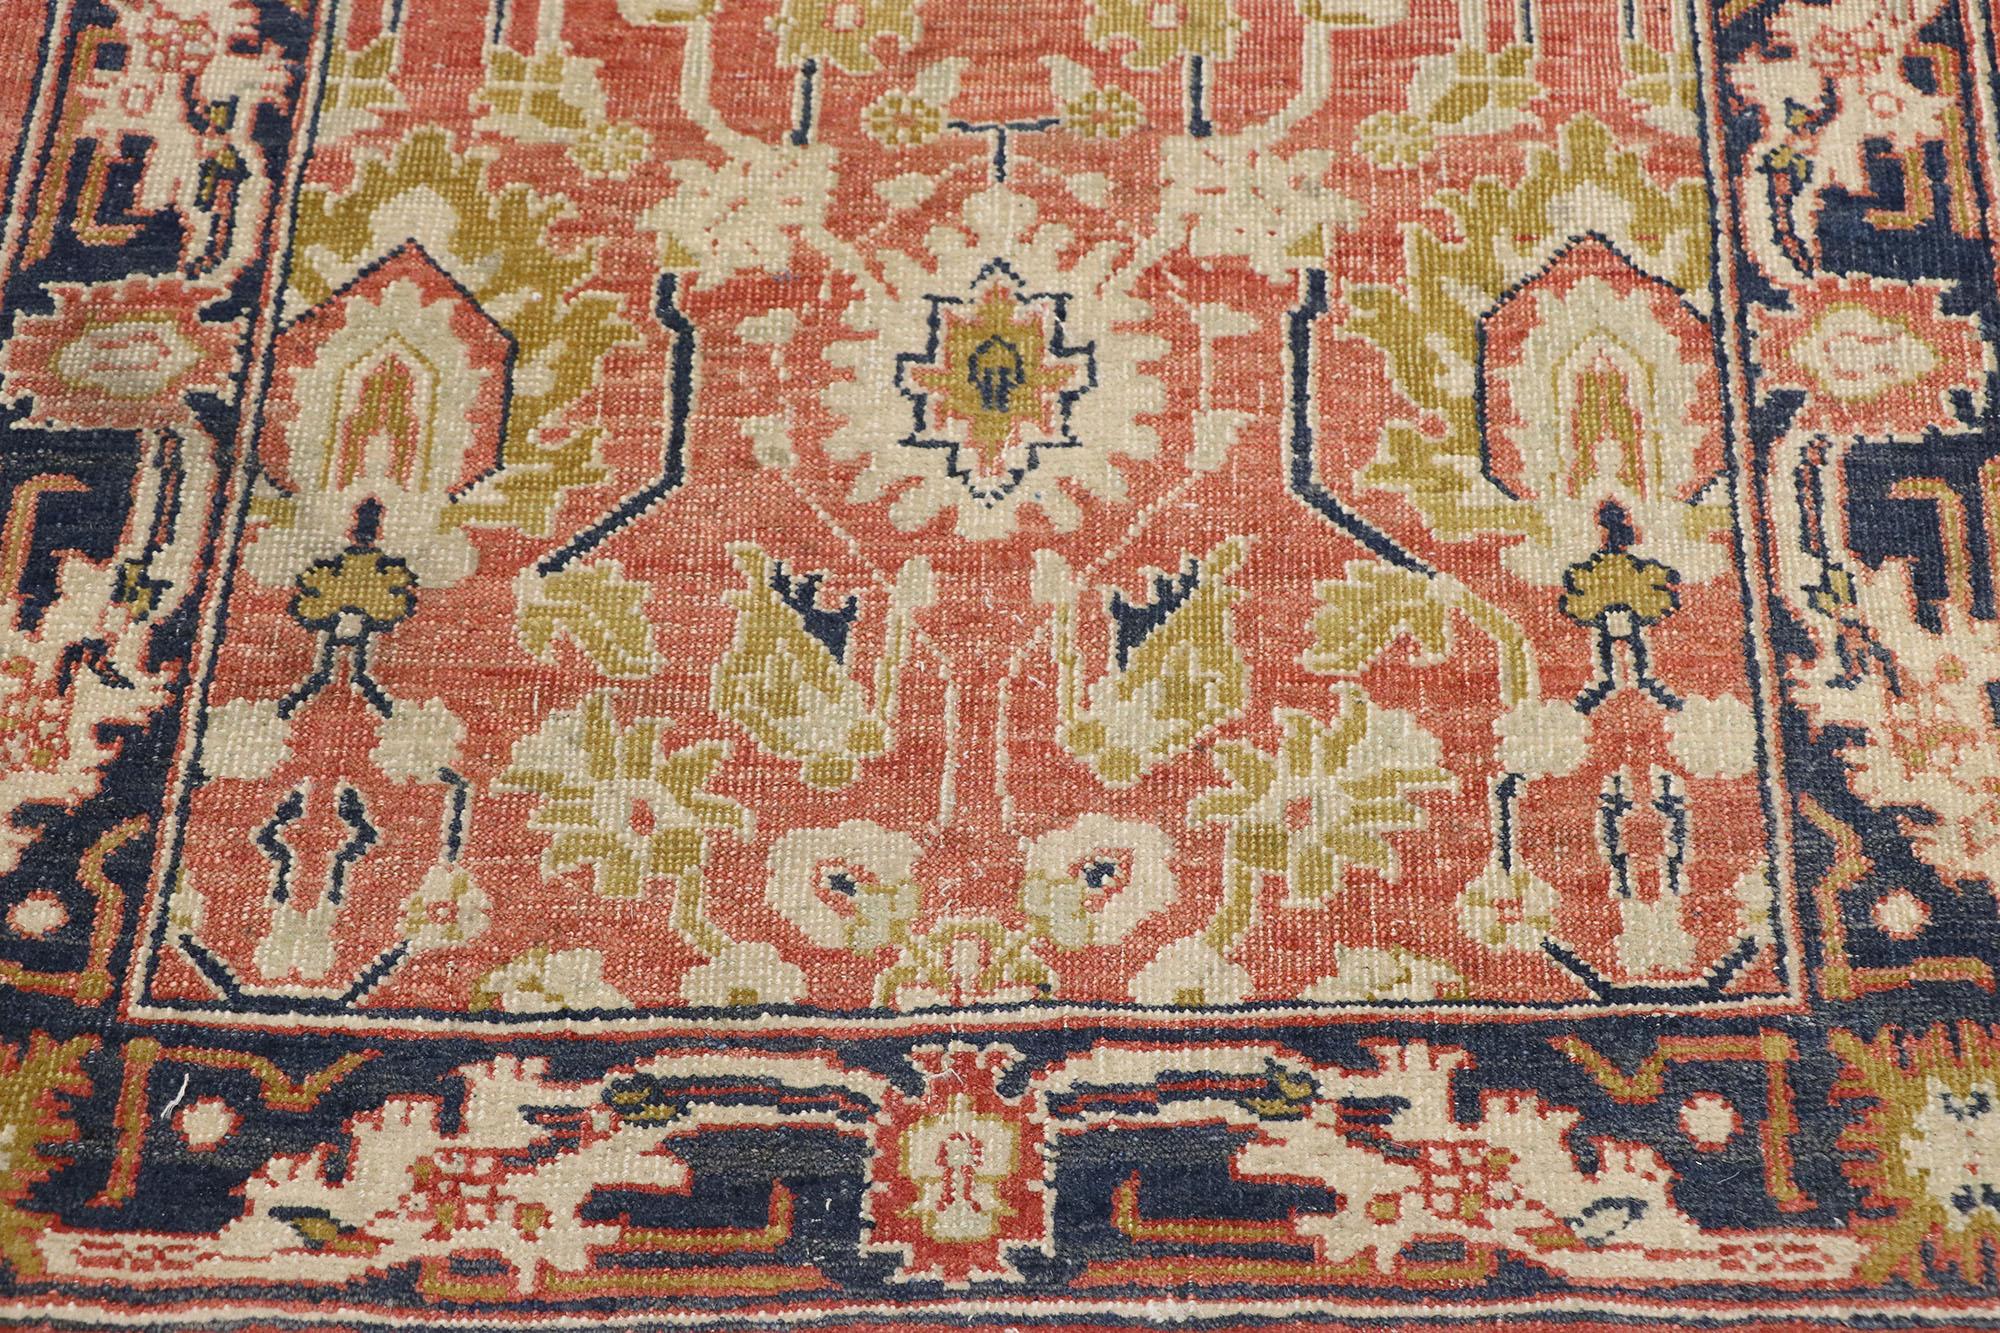 Hand-Knotted Distressed Antique Pakistani Runner with Rustic Arts & Crafts Style